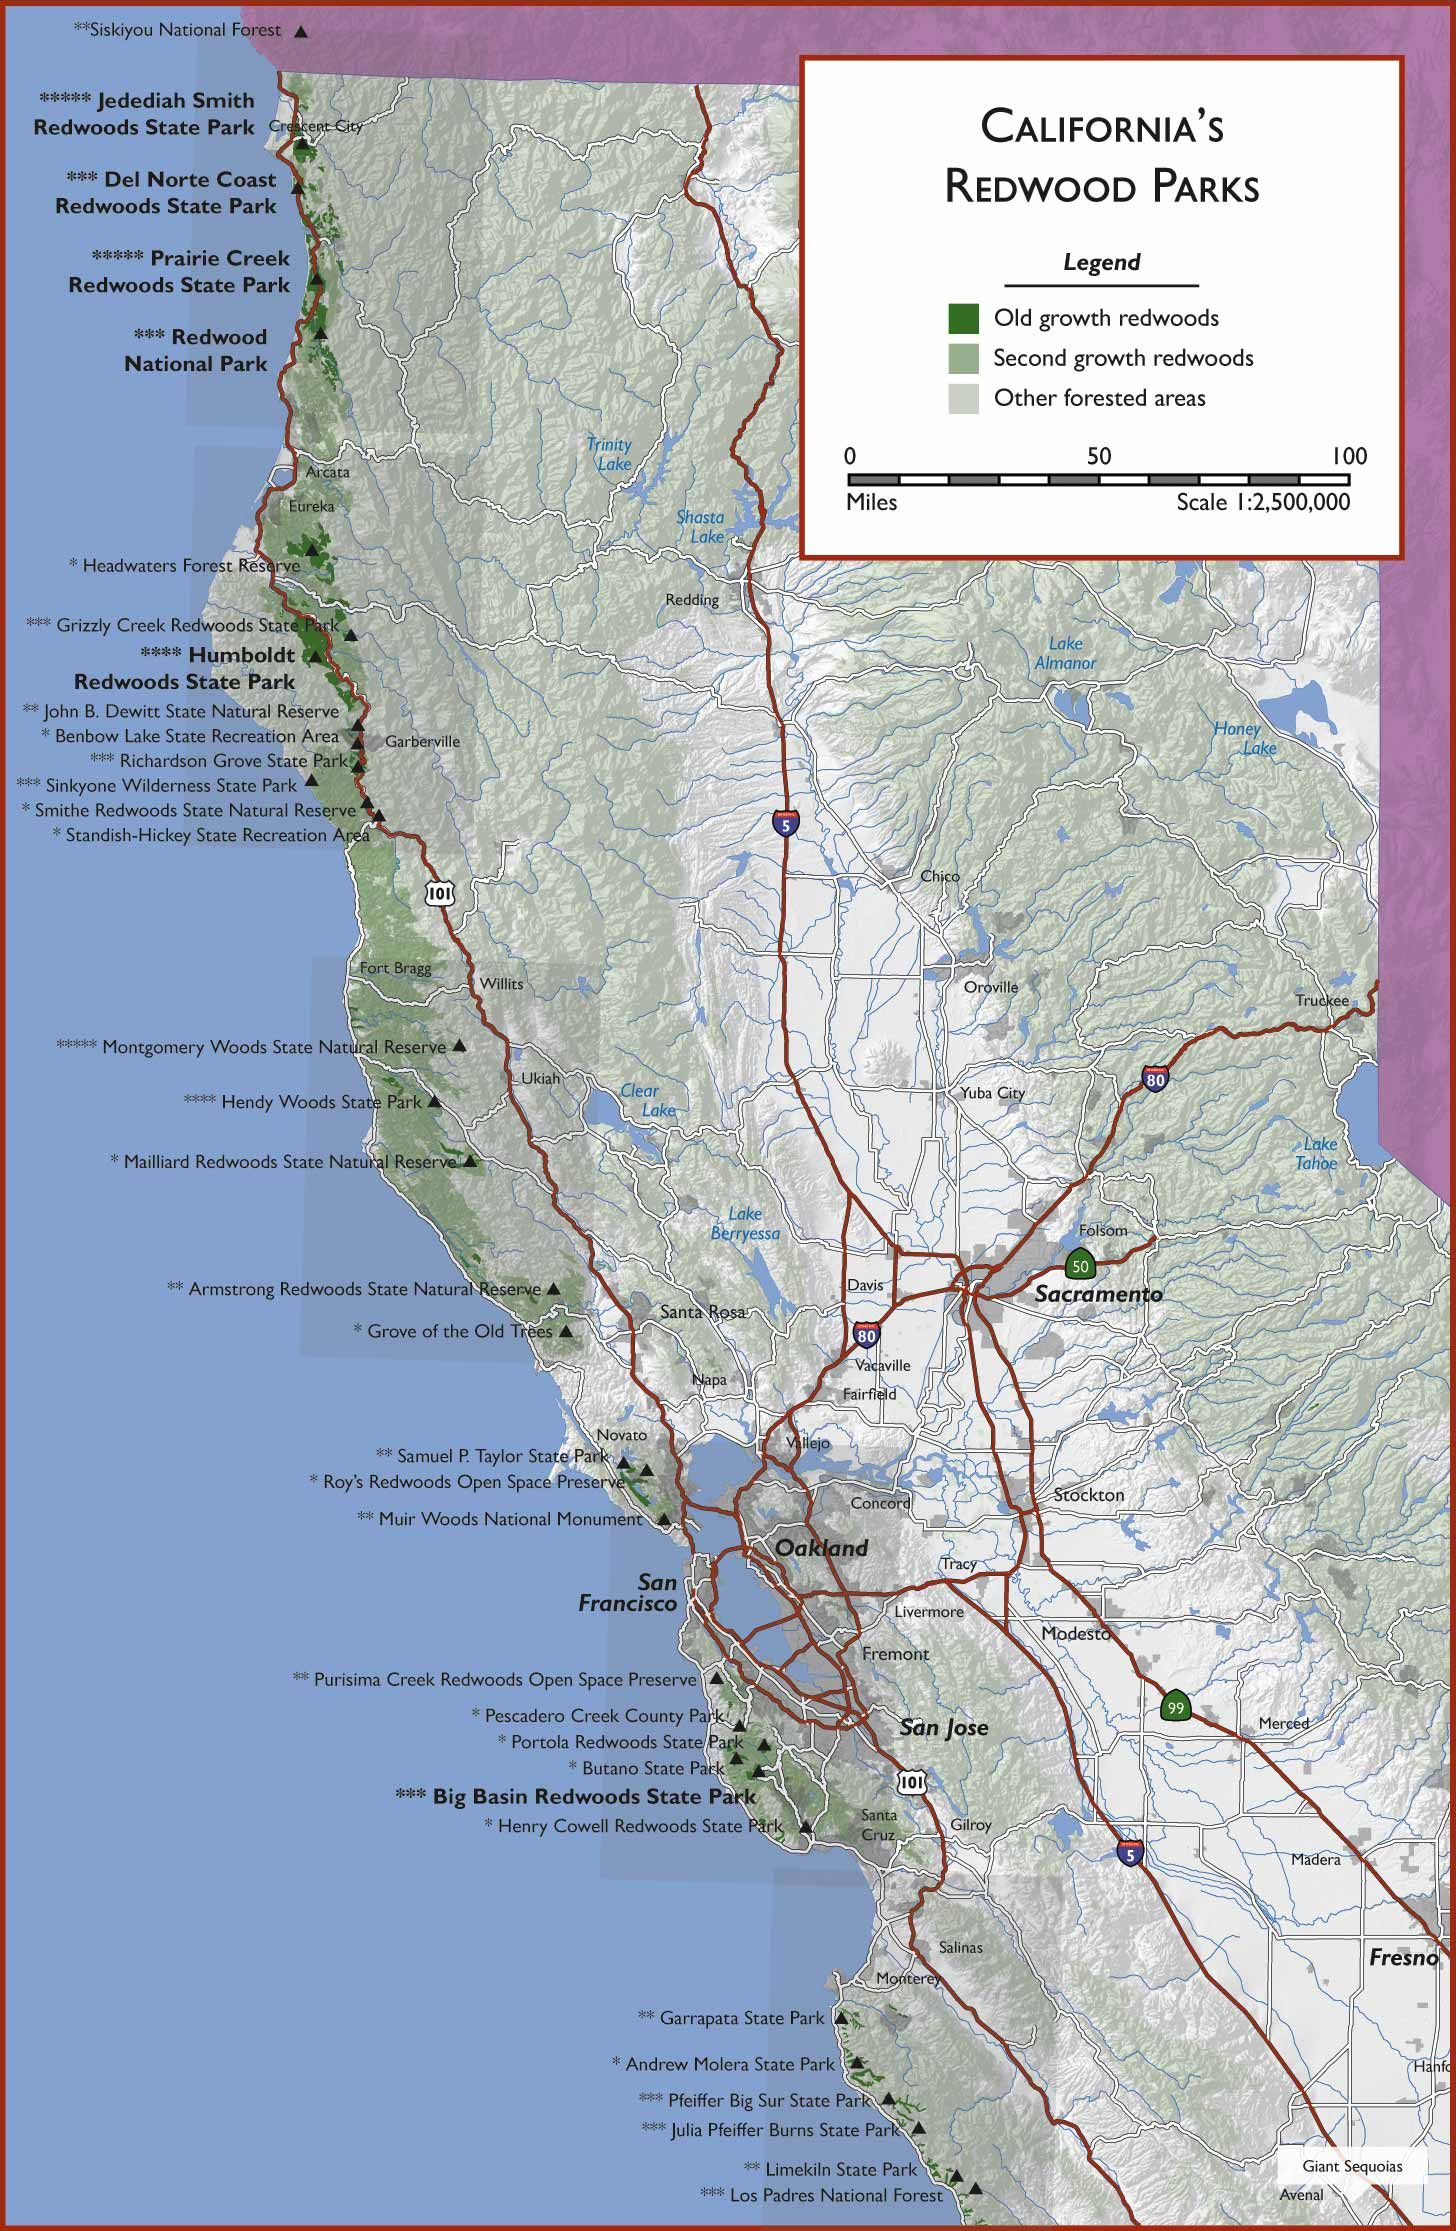 Redwood Hikes All Along The Coast. Links To How To Get To The Places - Northern California Hiking Map